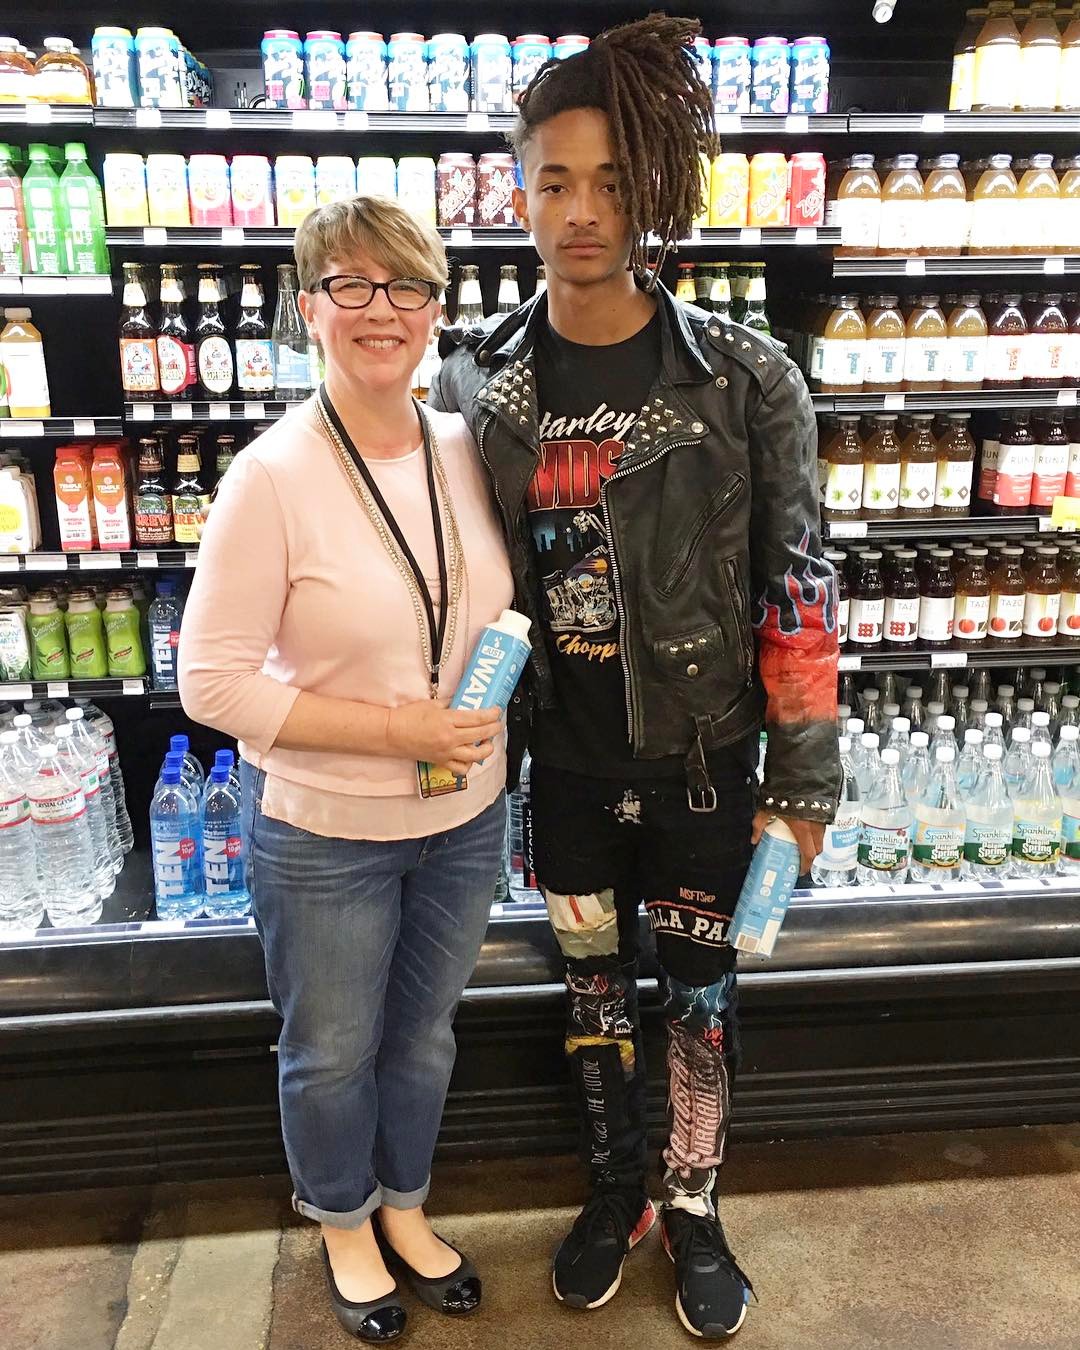 SPOTTED: Jaden Smith In Harley Davidson T-shirt and Adidas NMD Sneakers